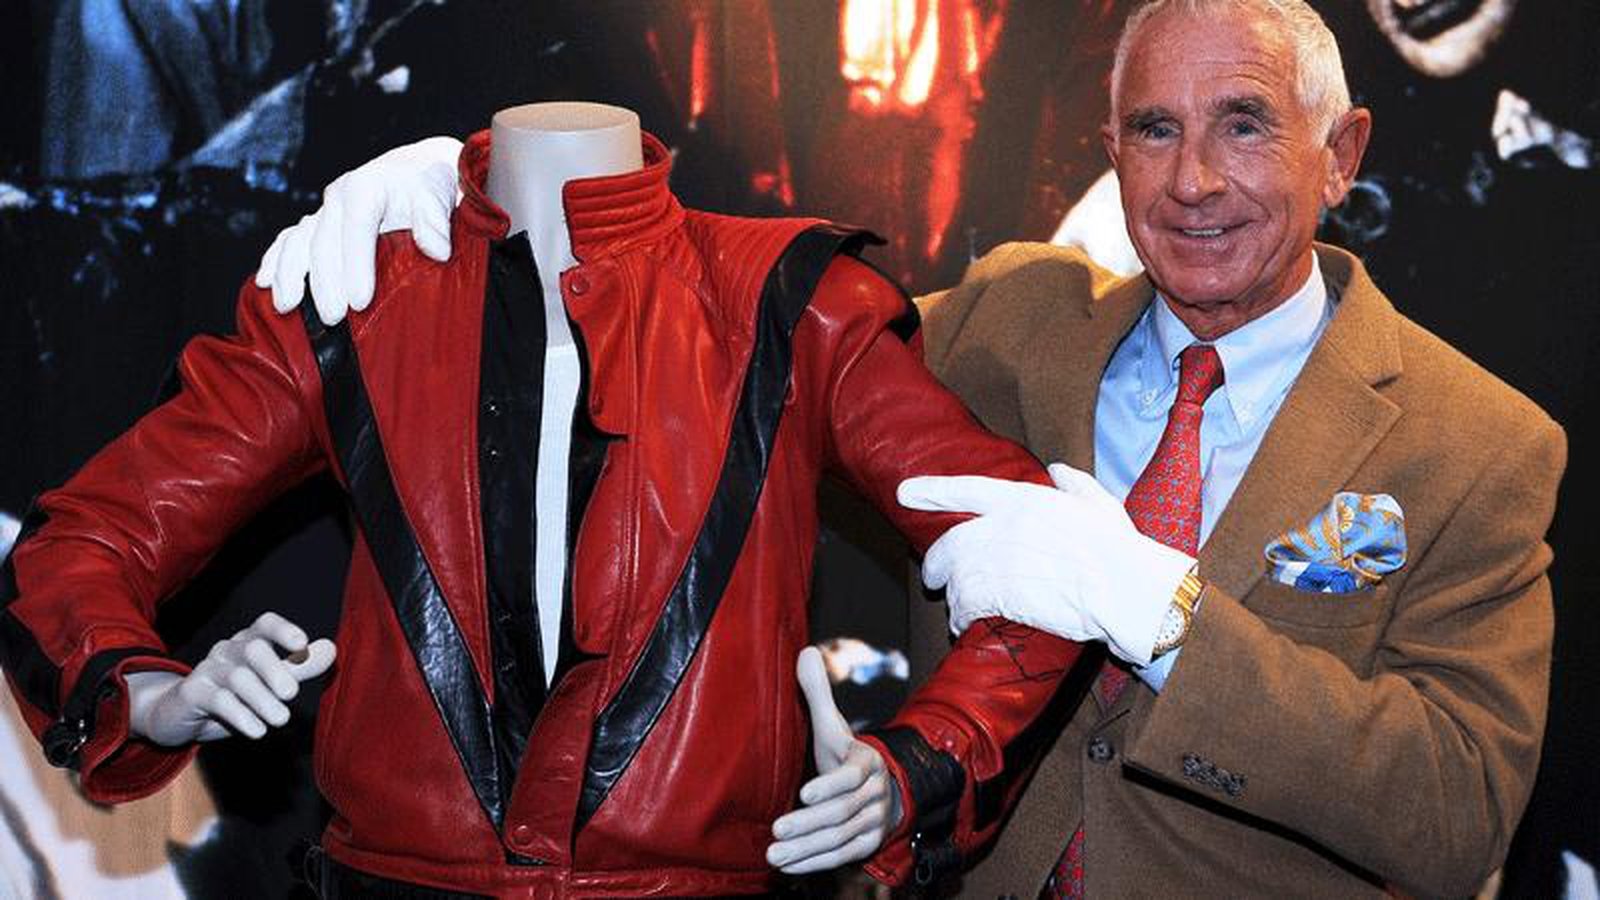 Michael Jackson Thriller Style Red Leather Members Only Jacket 